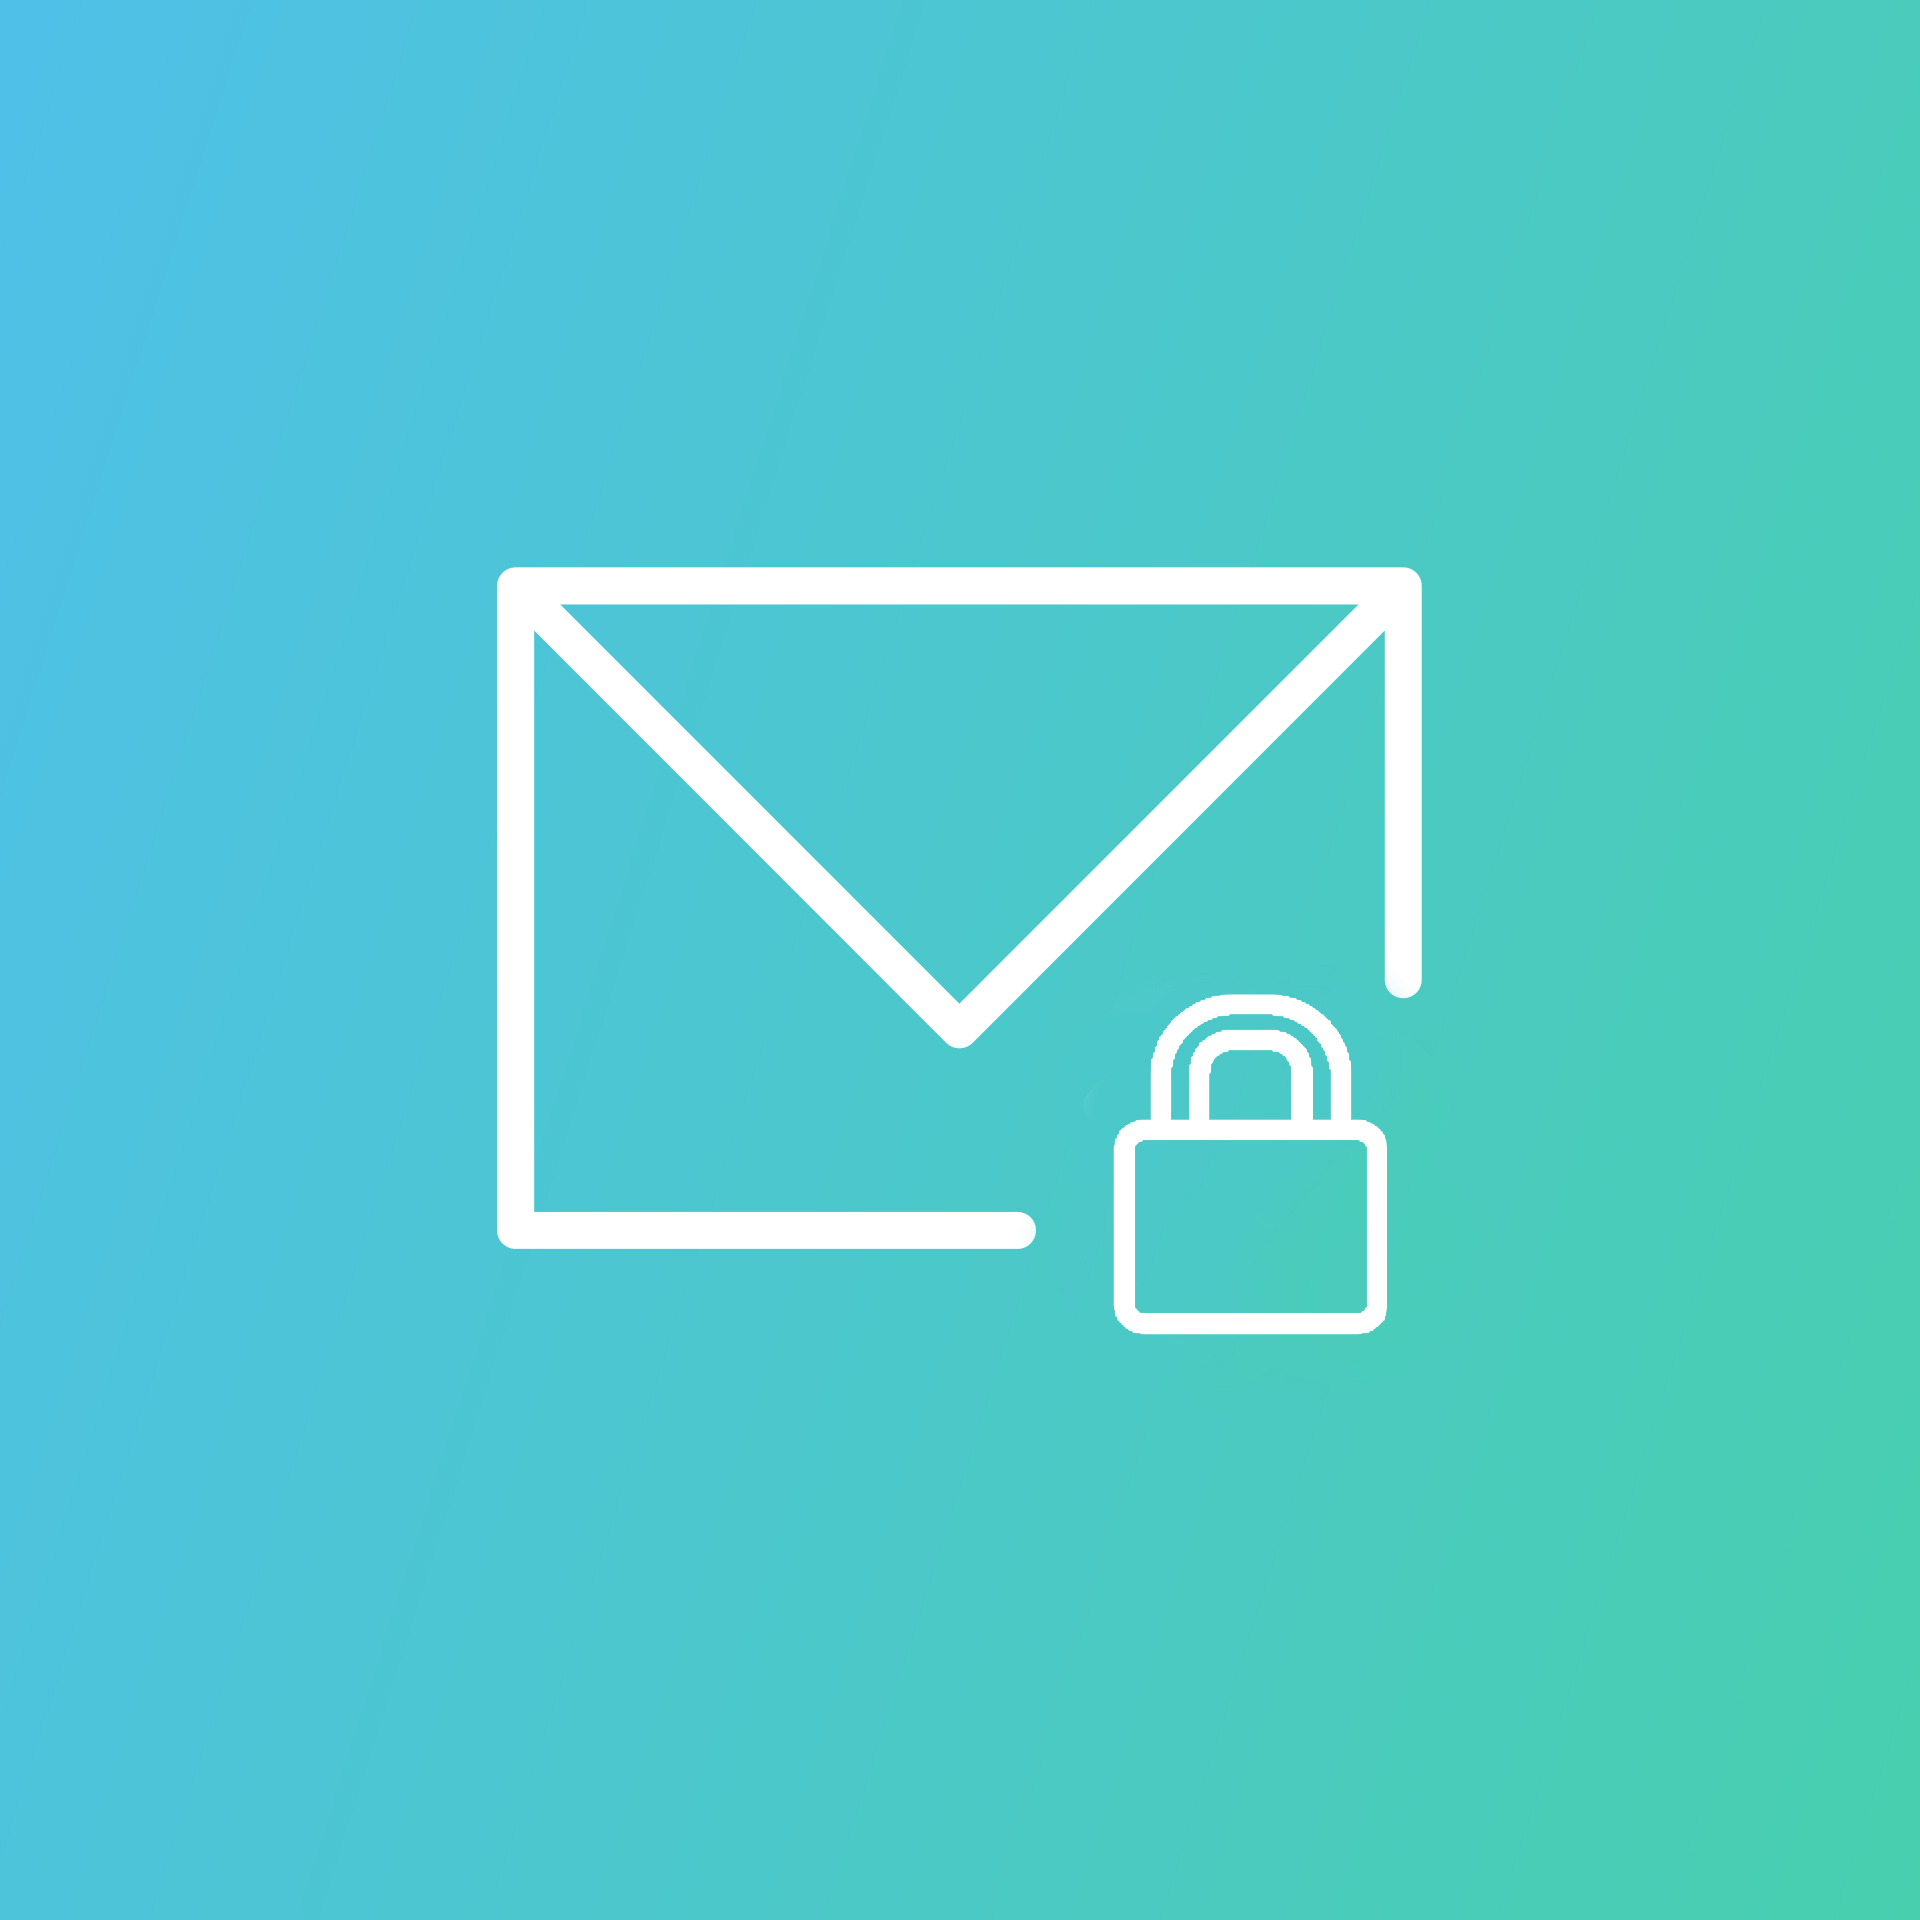 Office 365 email security enhancements